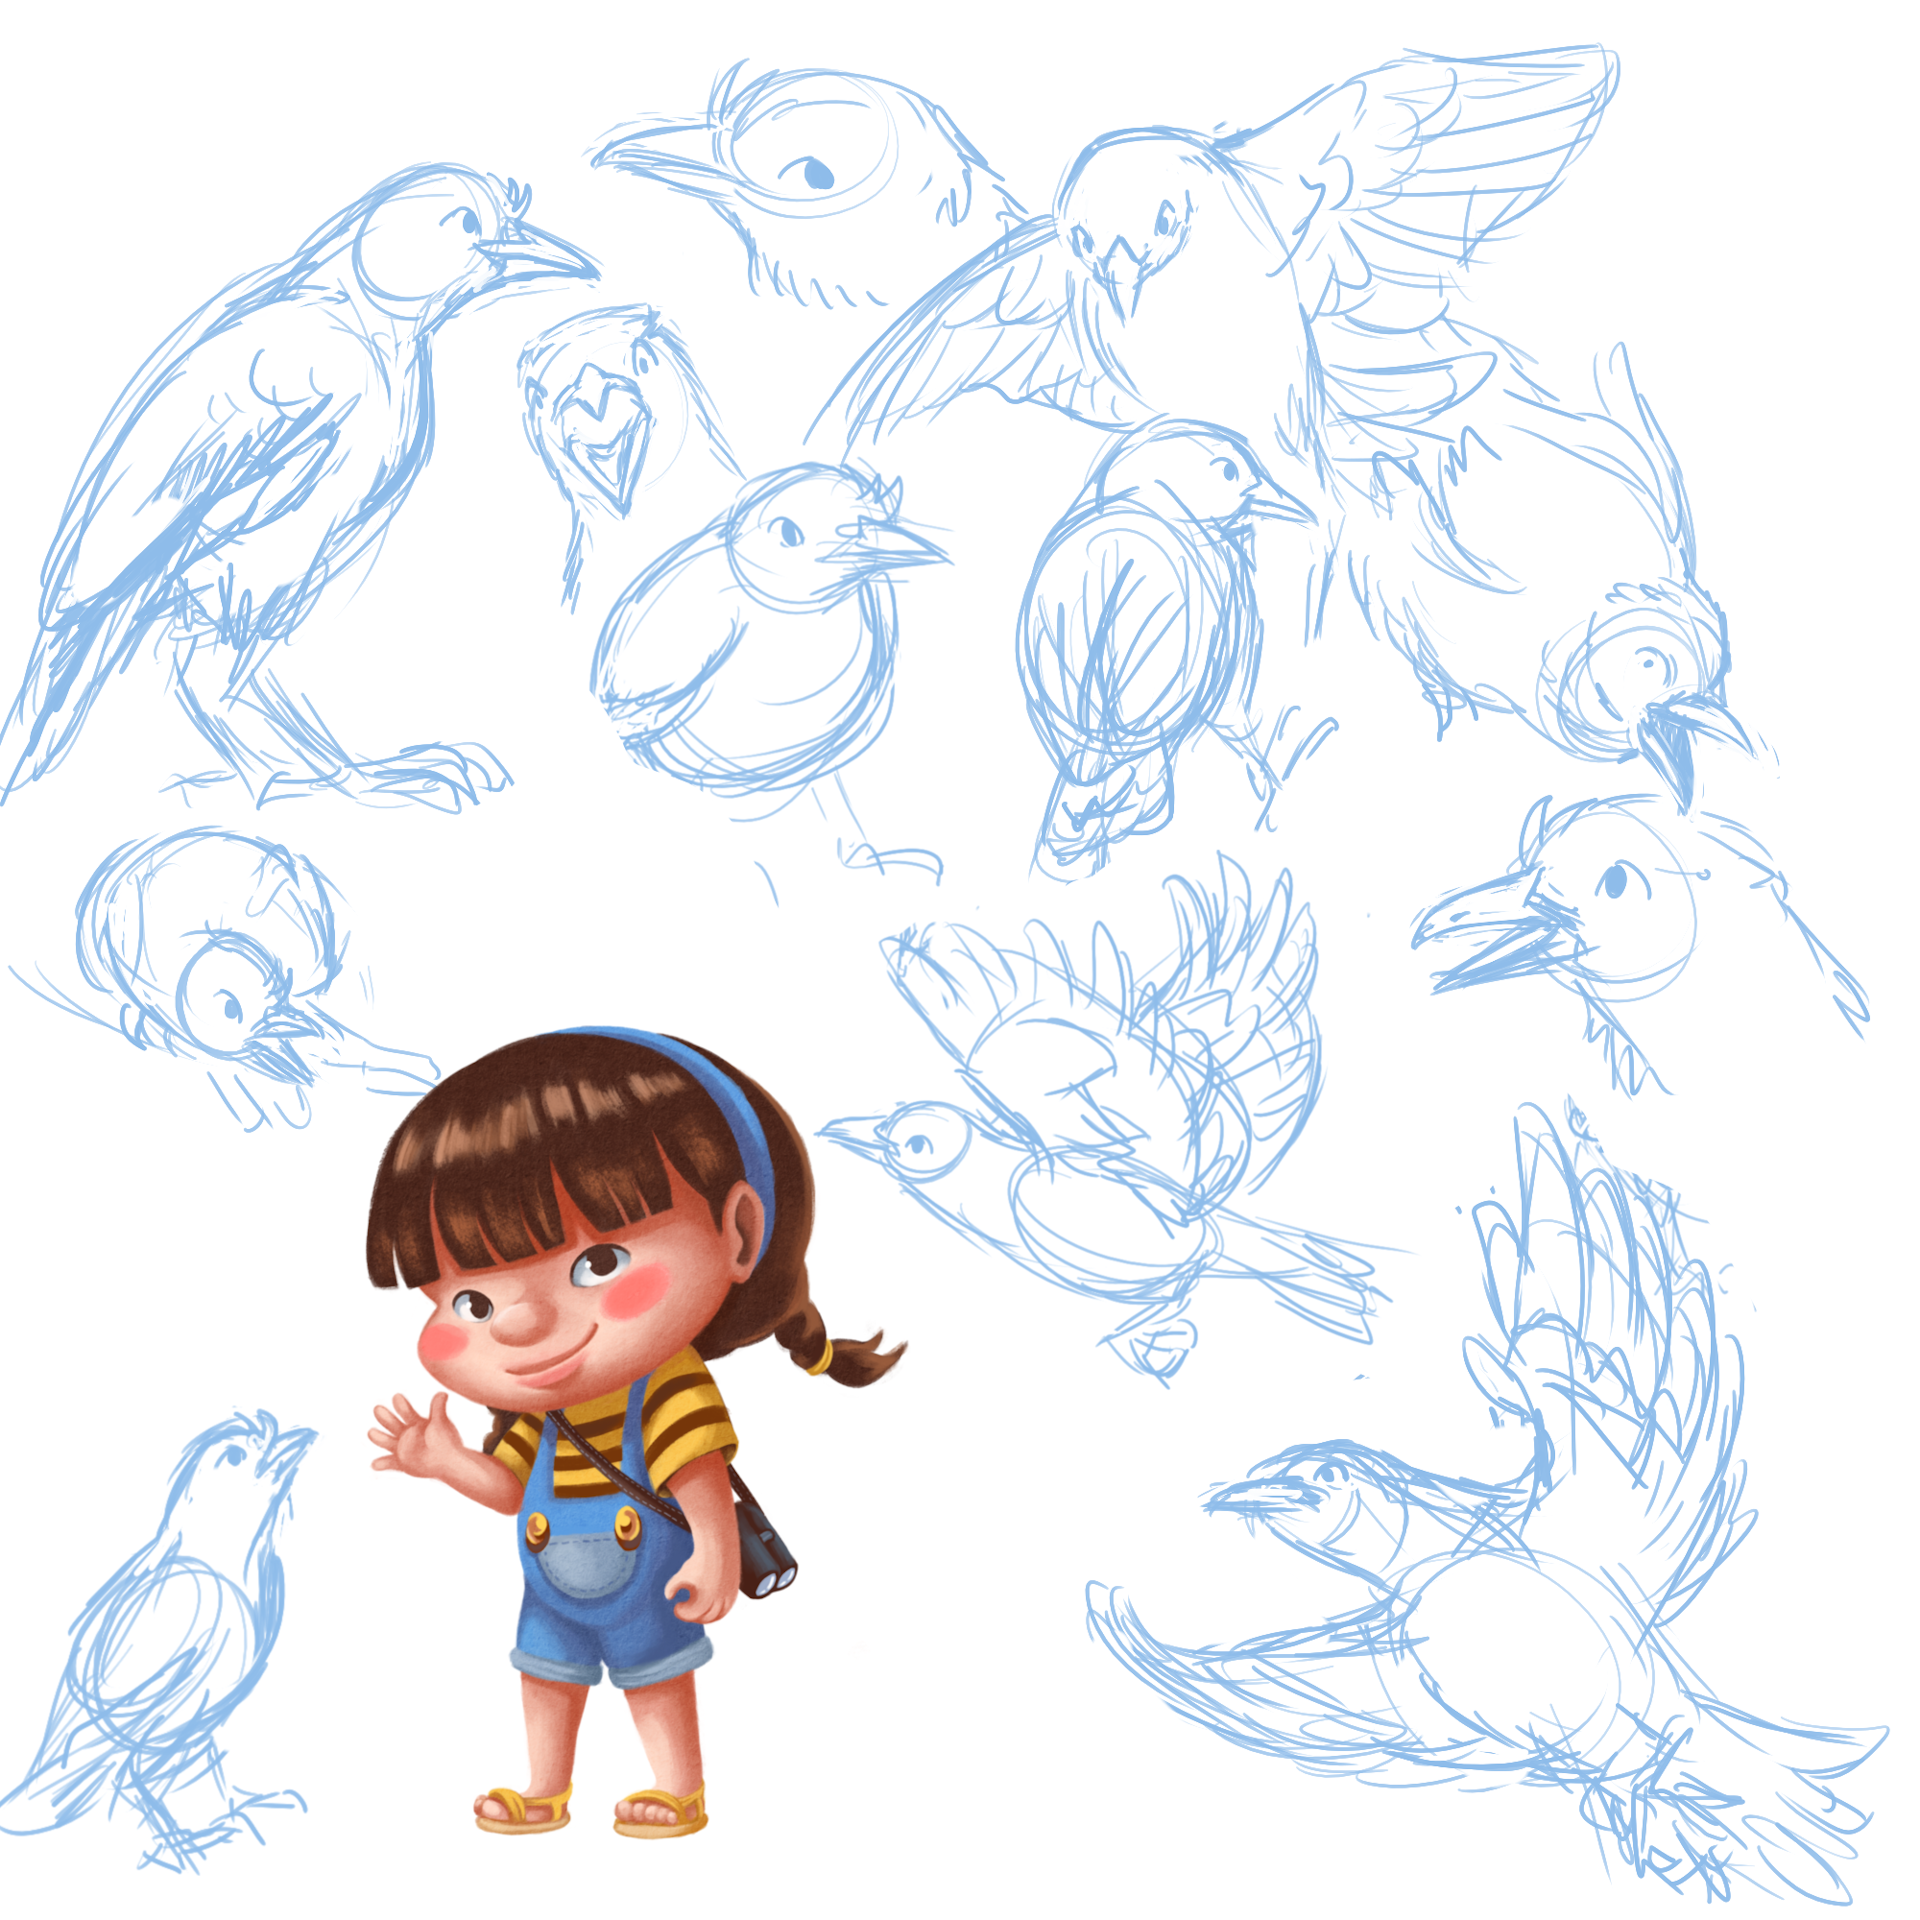 Initial sketches for Big Brother Myna's character